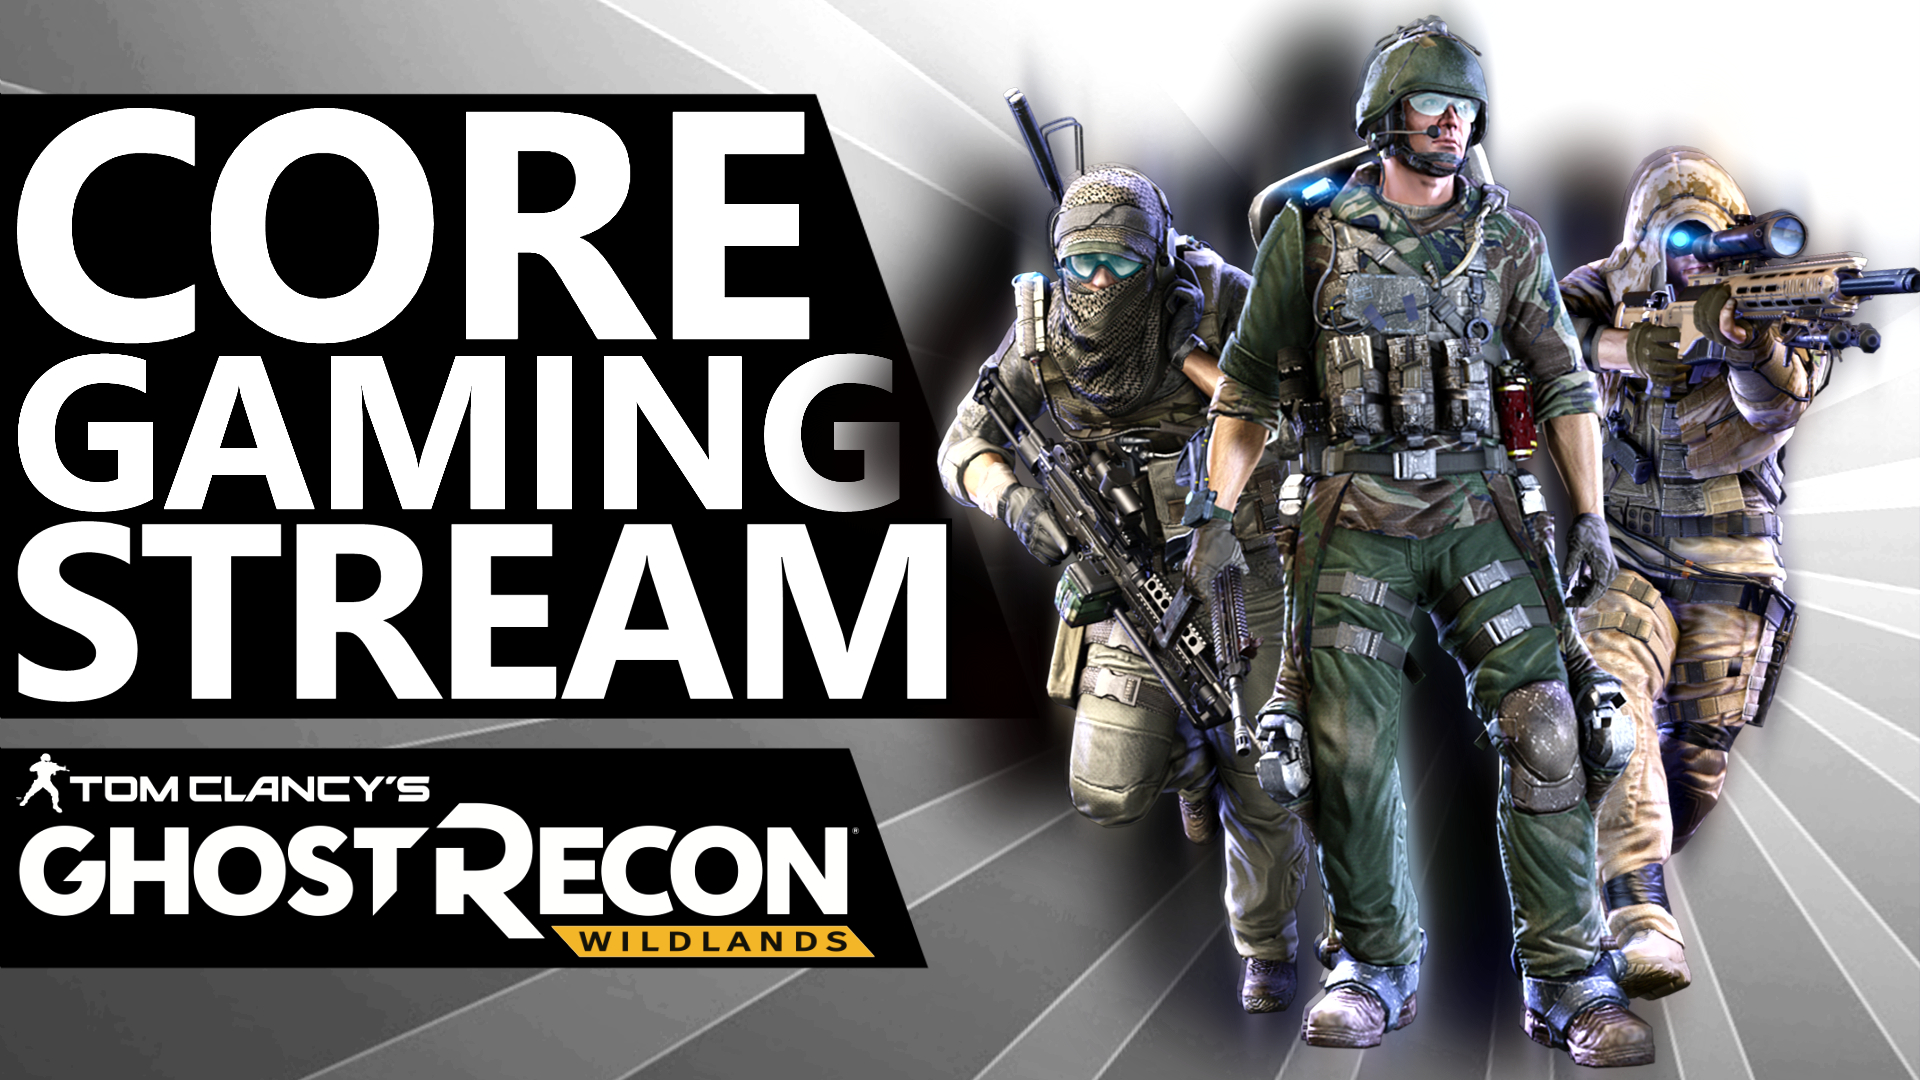 CORE GAMING LIVE GHOST RECOND WILDLANDS flipped_000000.jpg